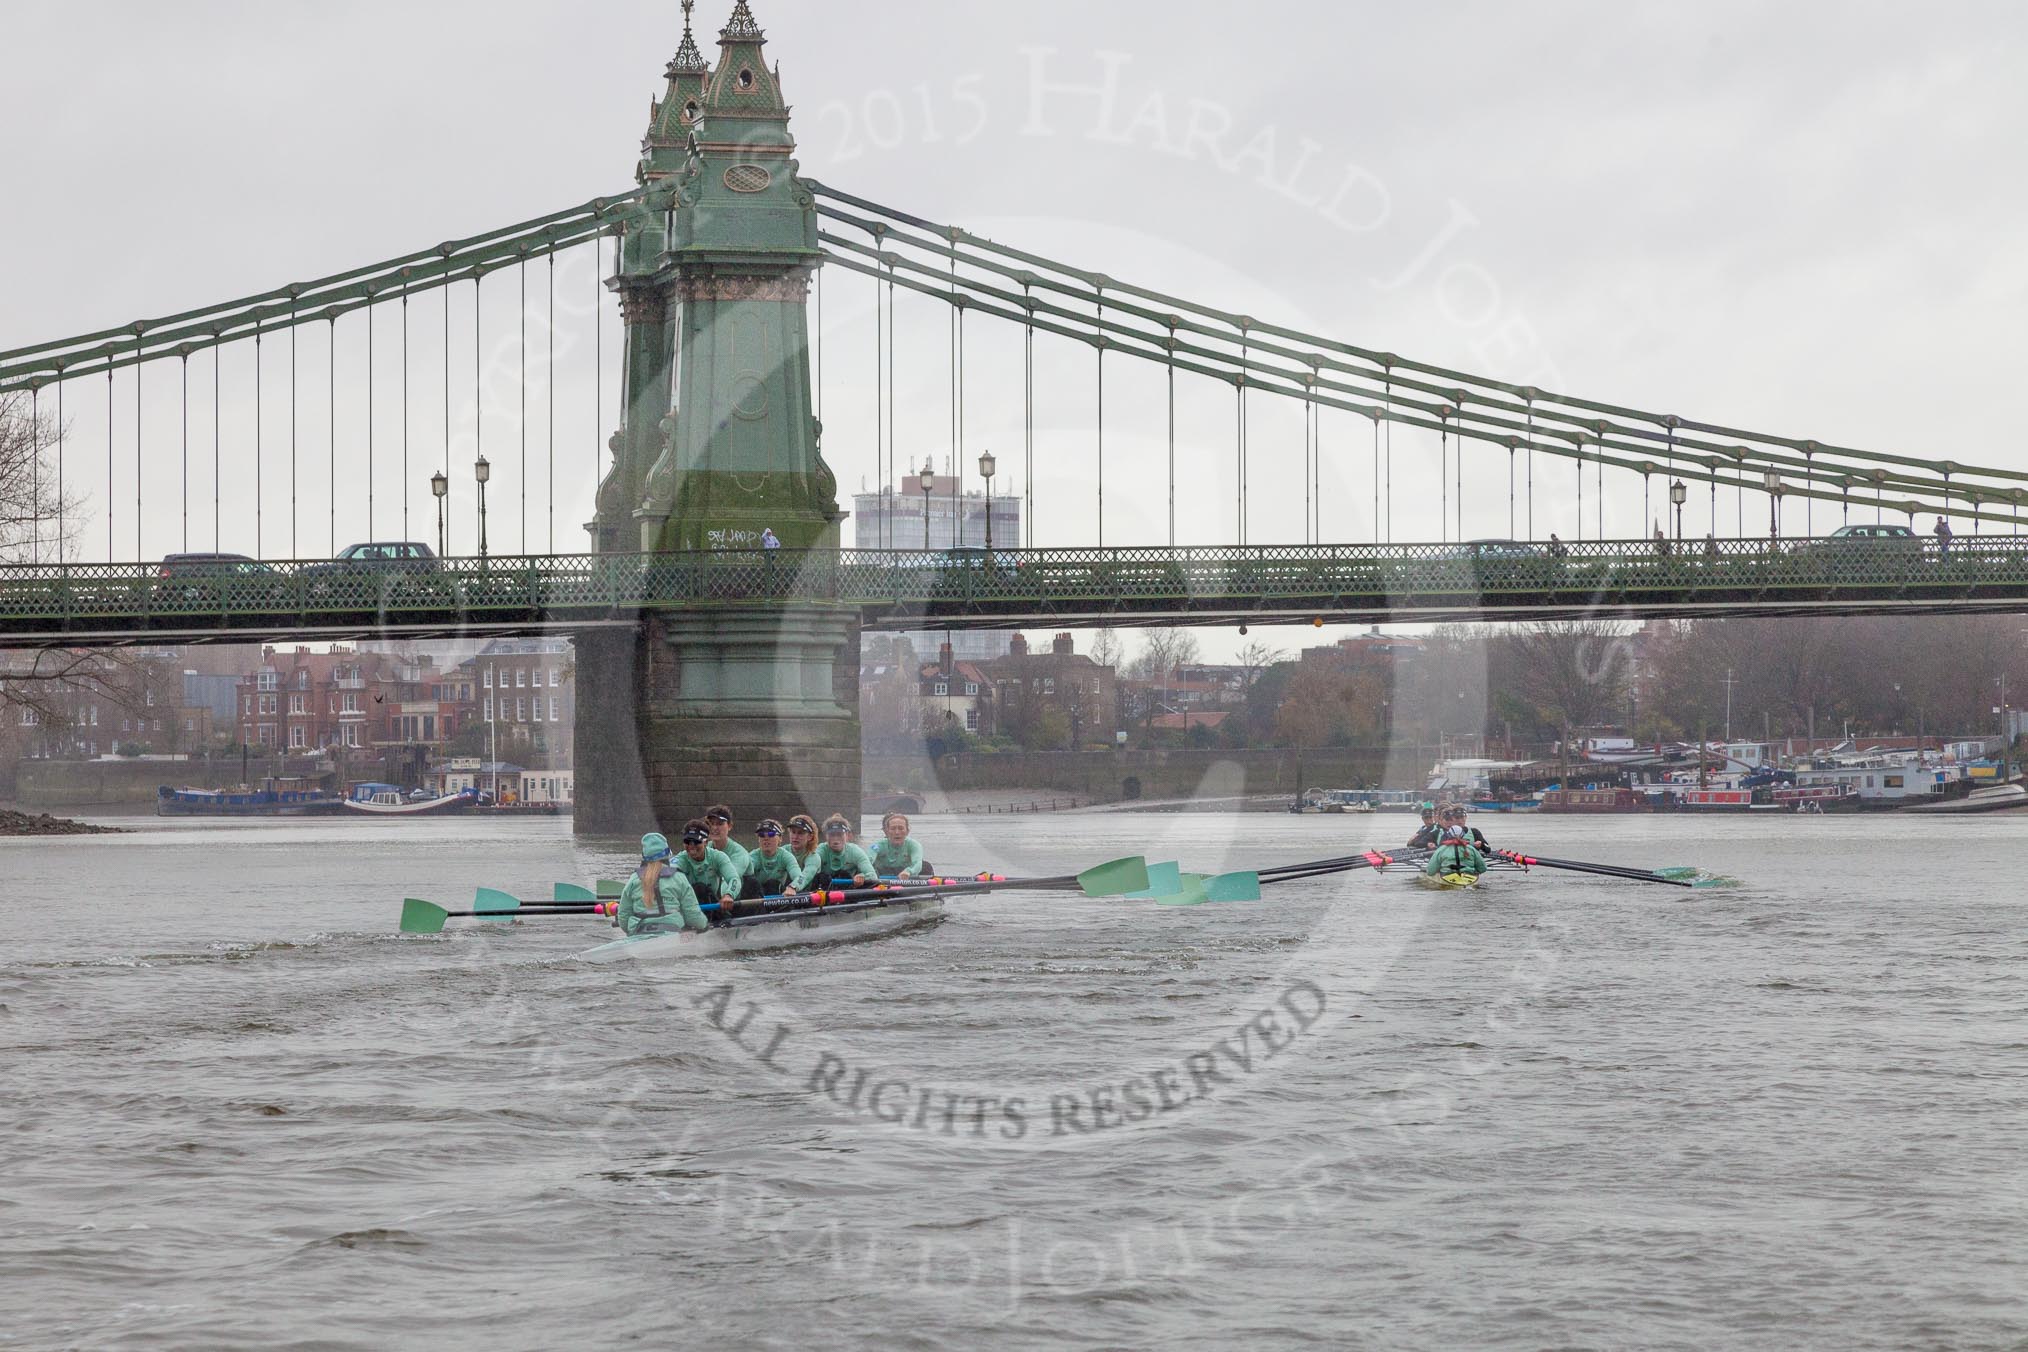 The Boat Race season 2016 - Women's Boat Race Trial Eights (CUWBC, Cambridge): "Tideway" chasing "Twickenham" on the approach to Hammersmith Bridge.
River Thames between Putney Bridge and Mortlake,
London SW15,

United Kingdom,
on 10 December 2015 at 11:10, image #78